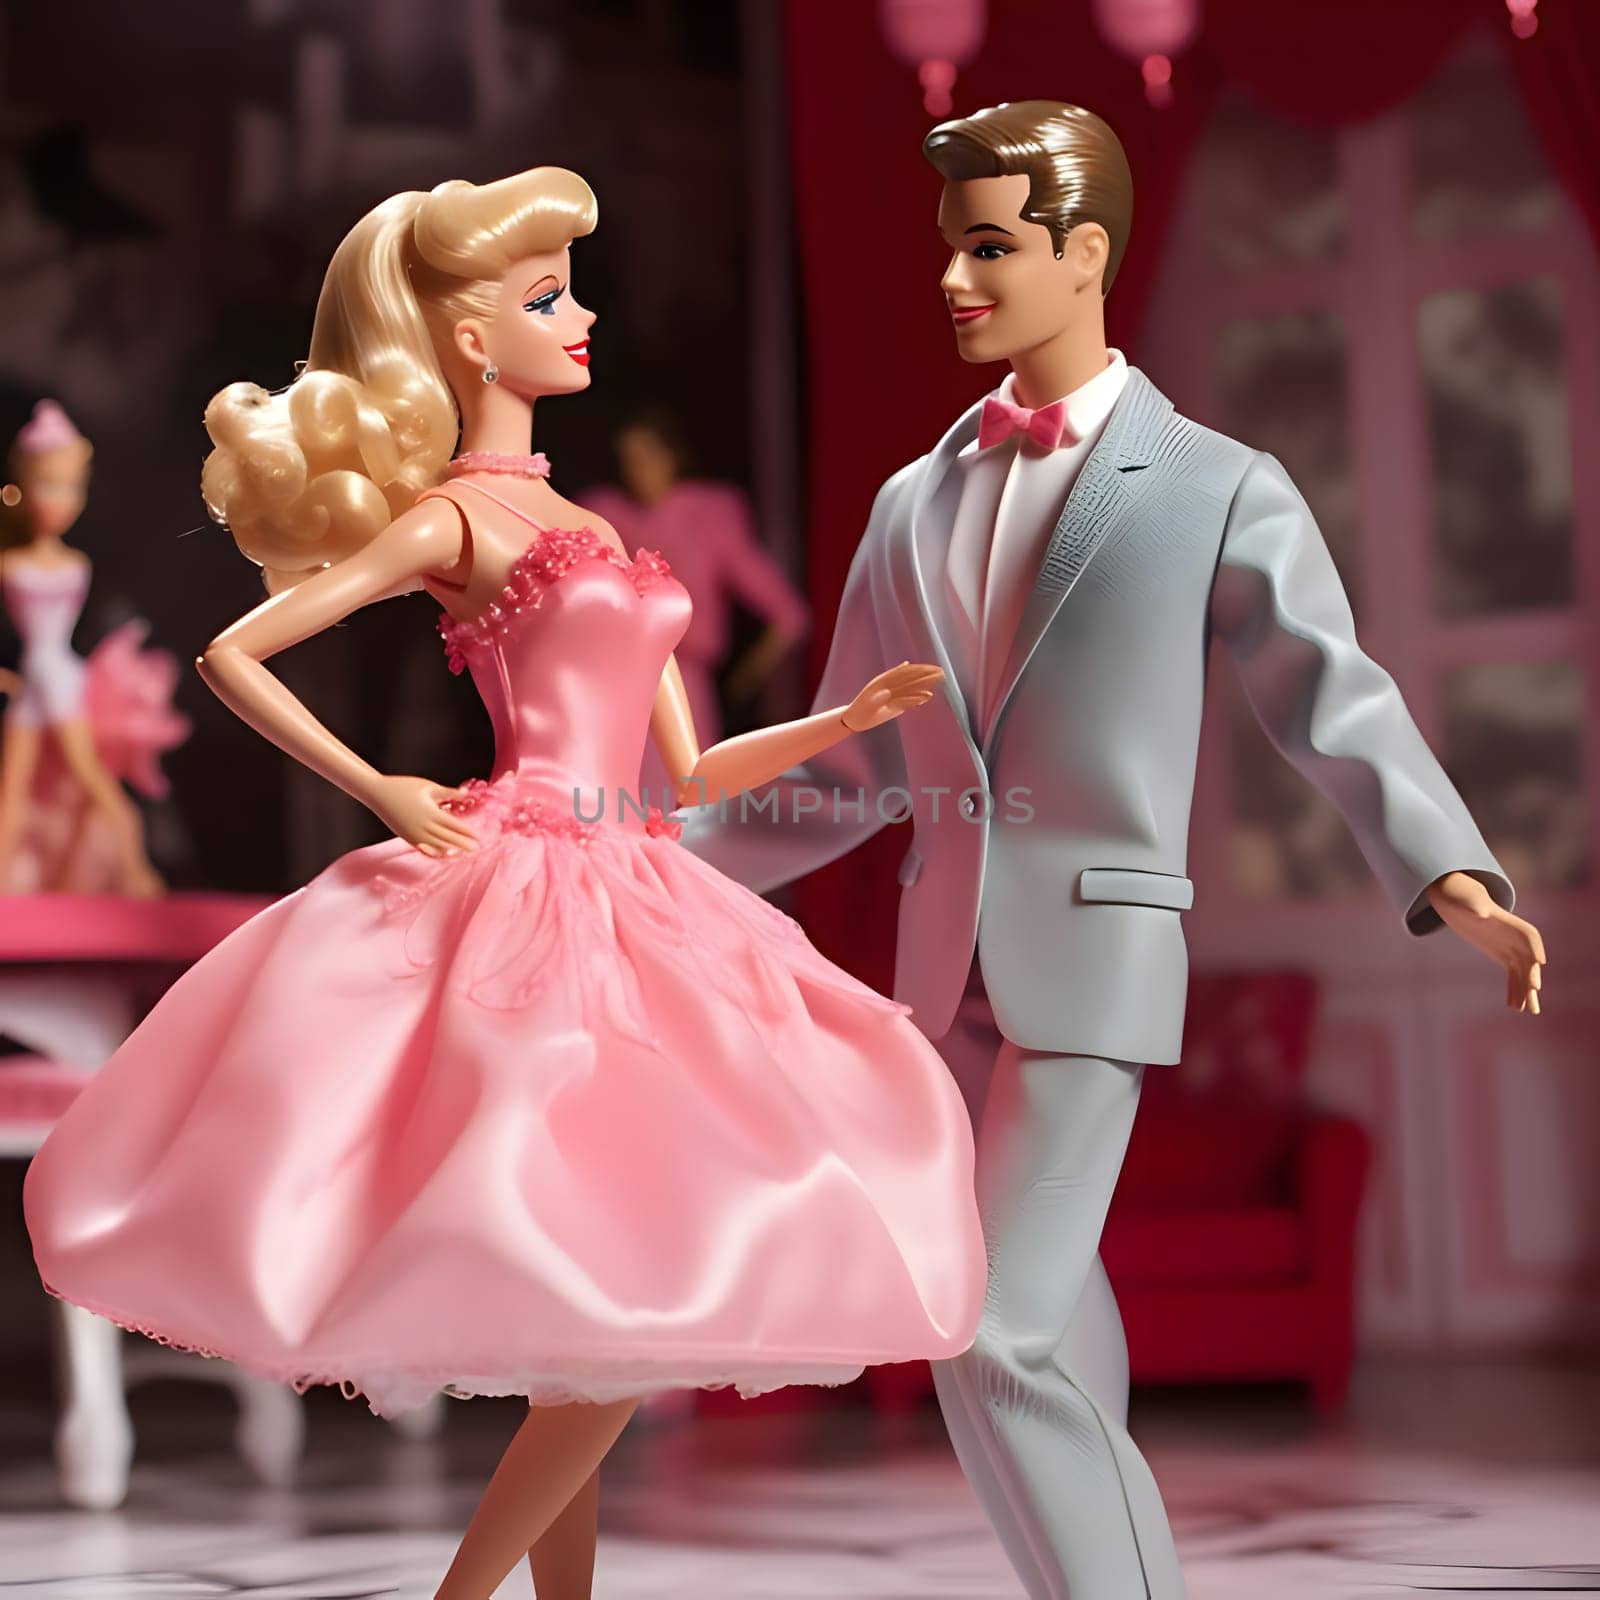 Barbie in a pink dress dances with LGBT Ken in a light-colored suit, celebrating love and diversity.